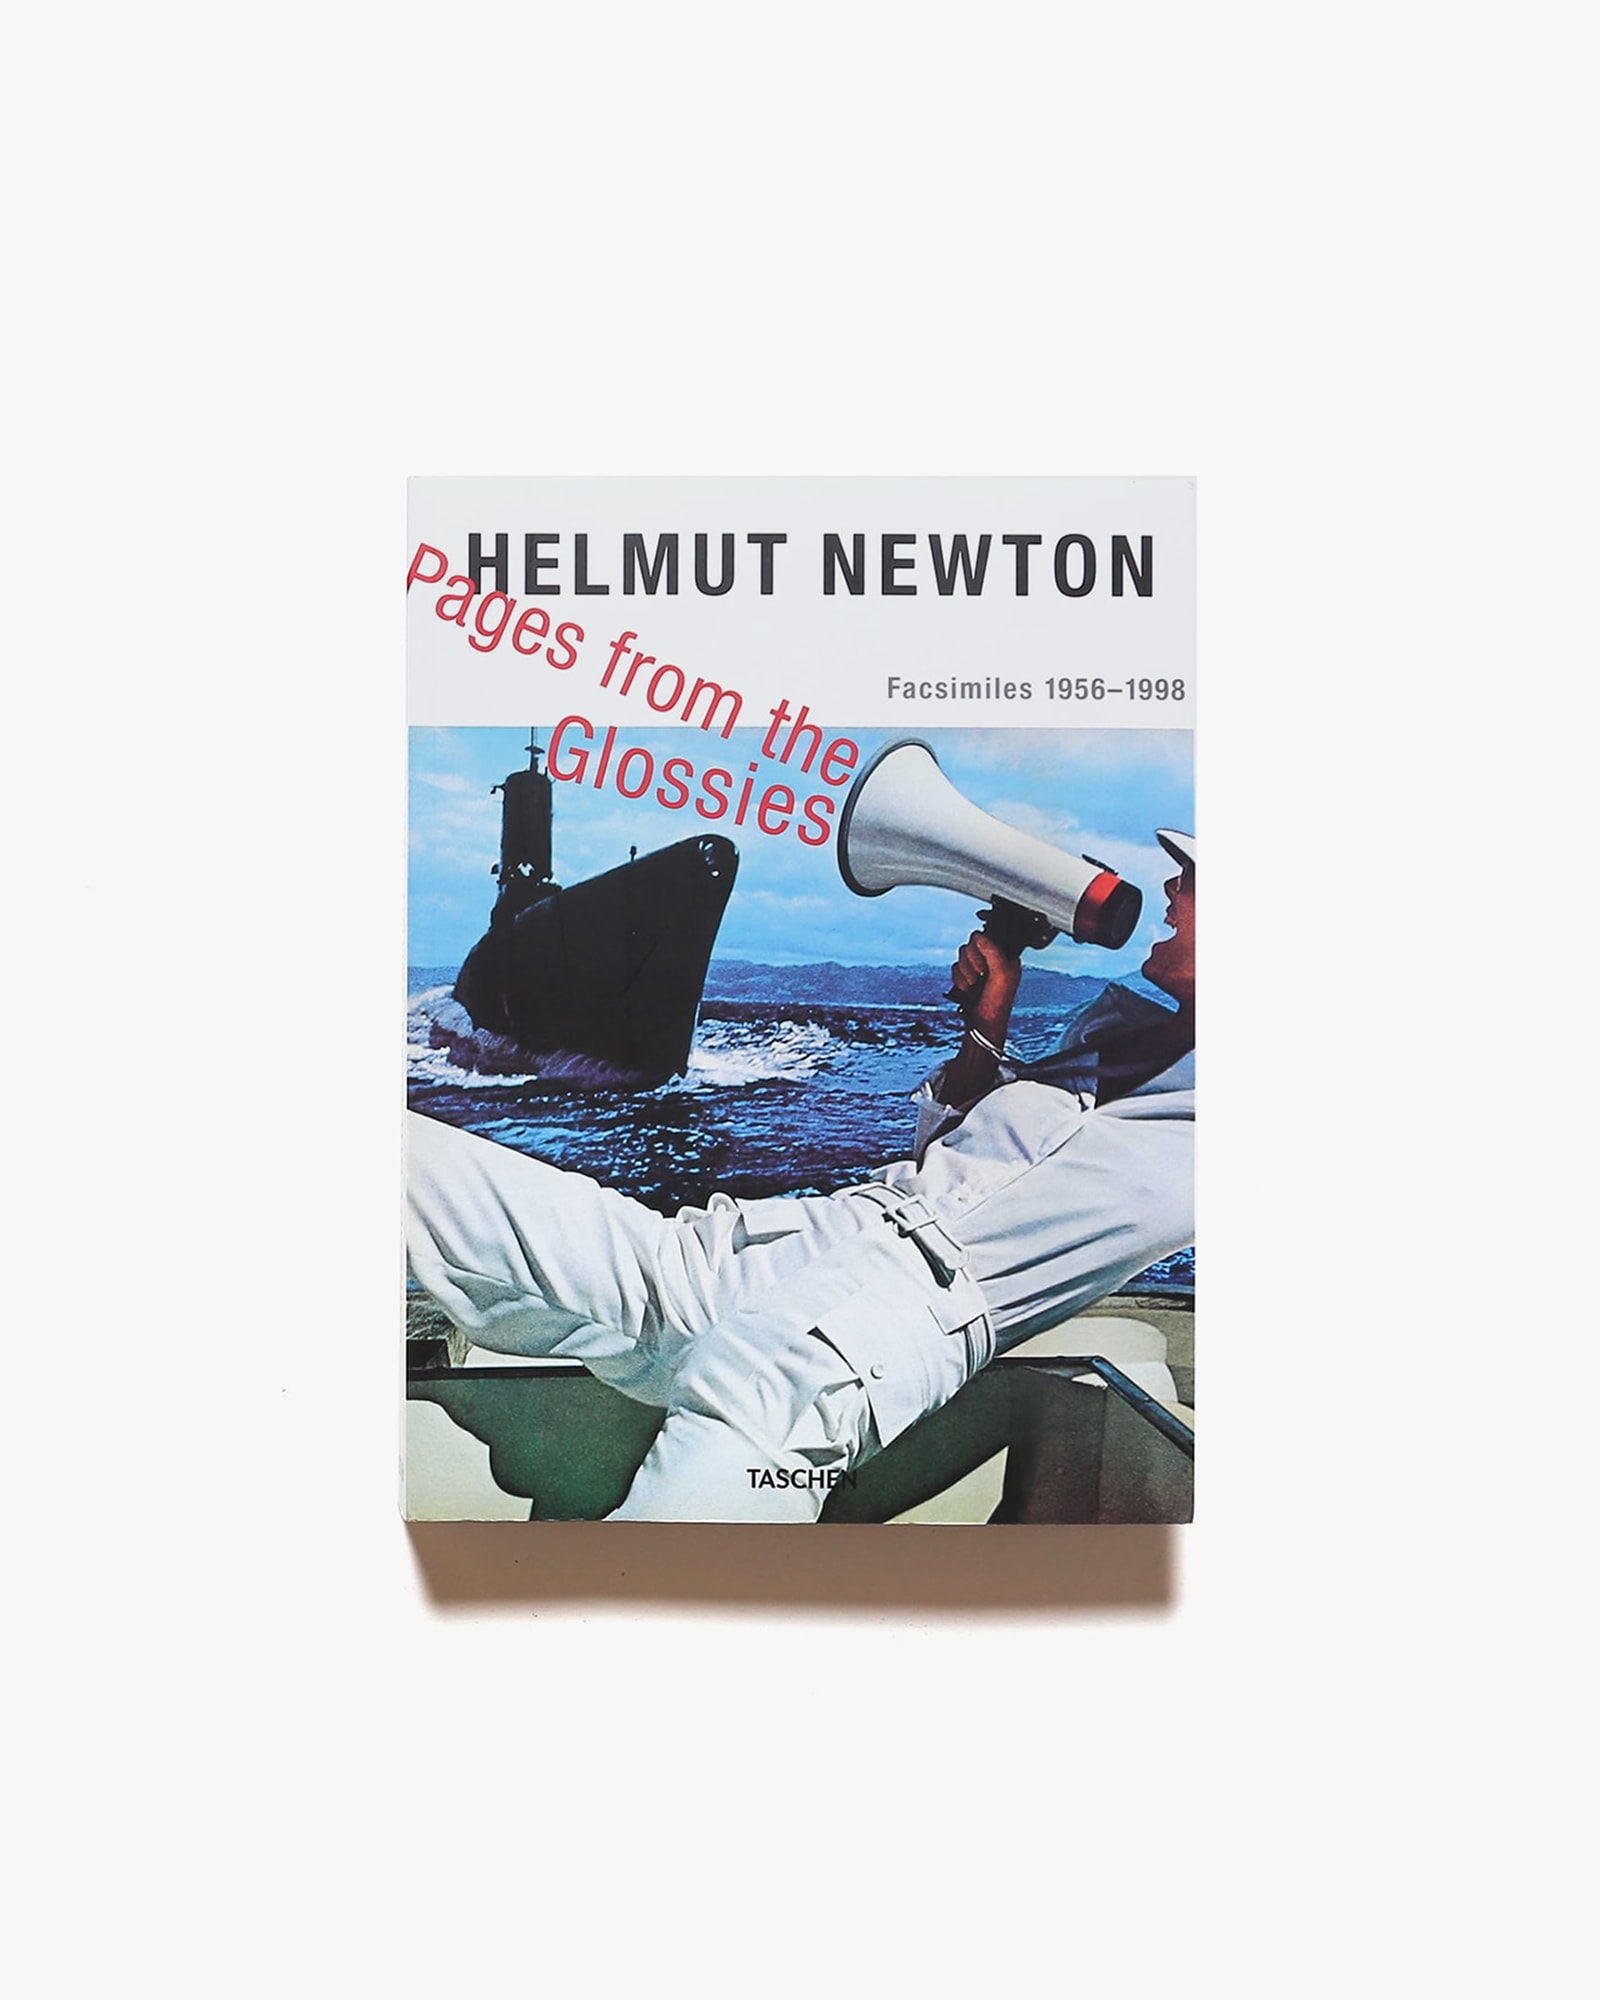 Hemut Newton: Pages from the Glossies